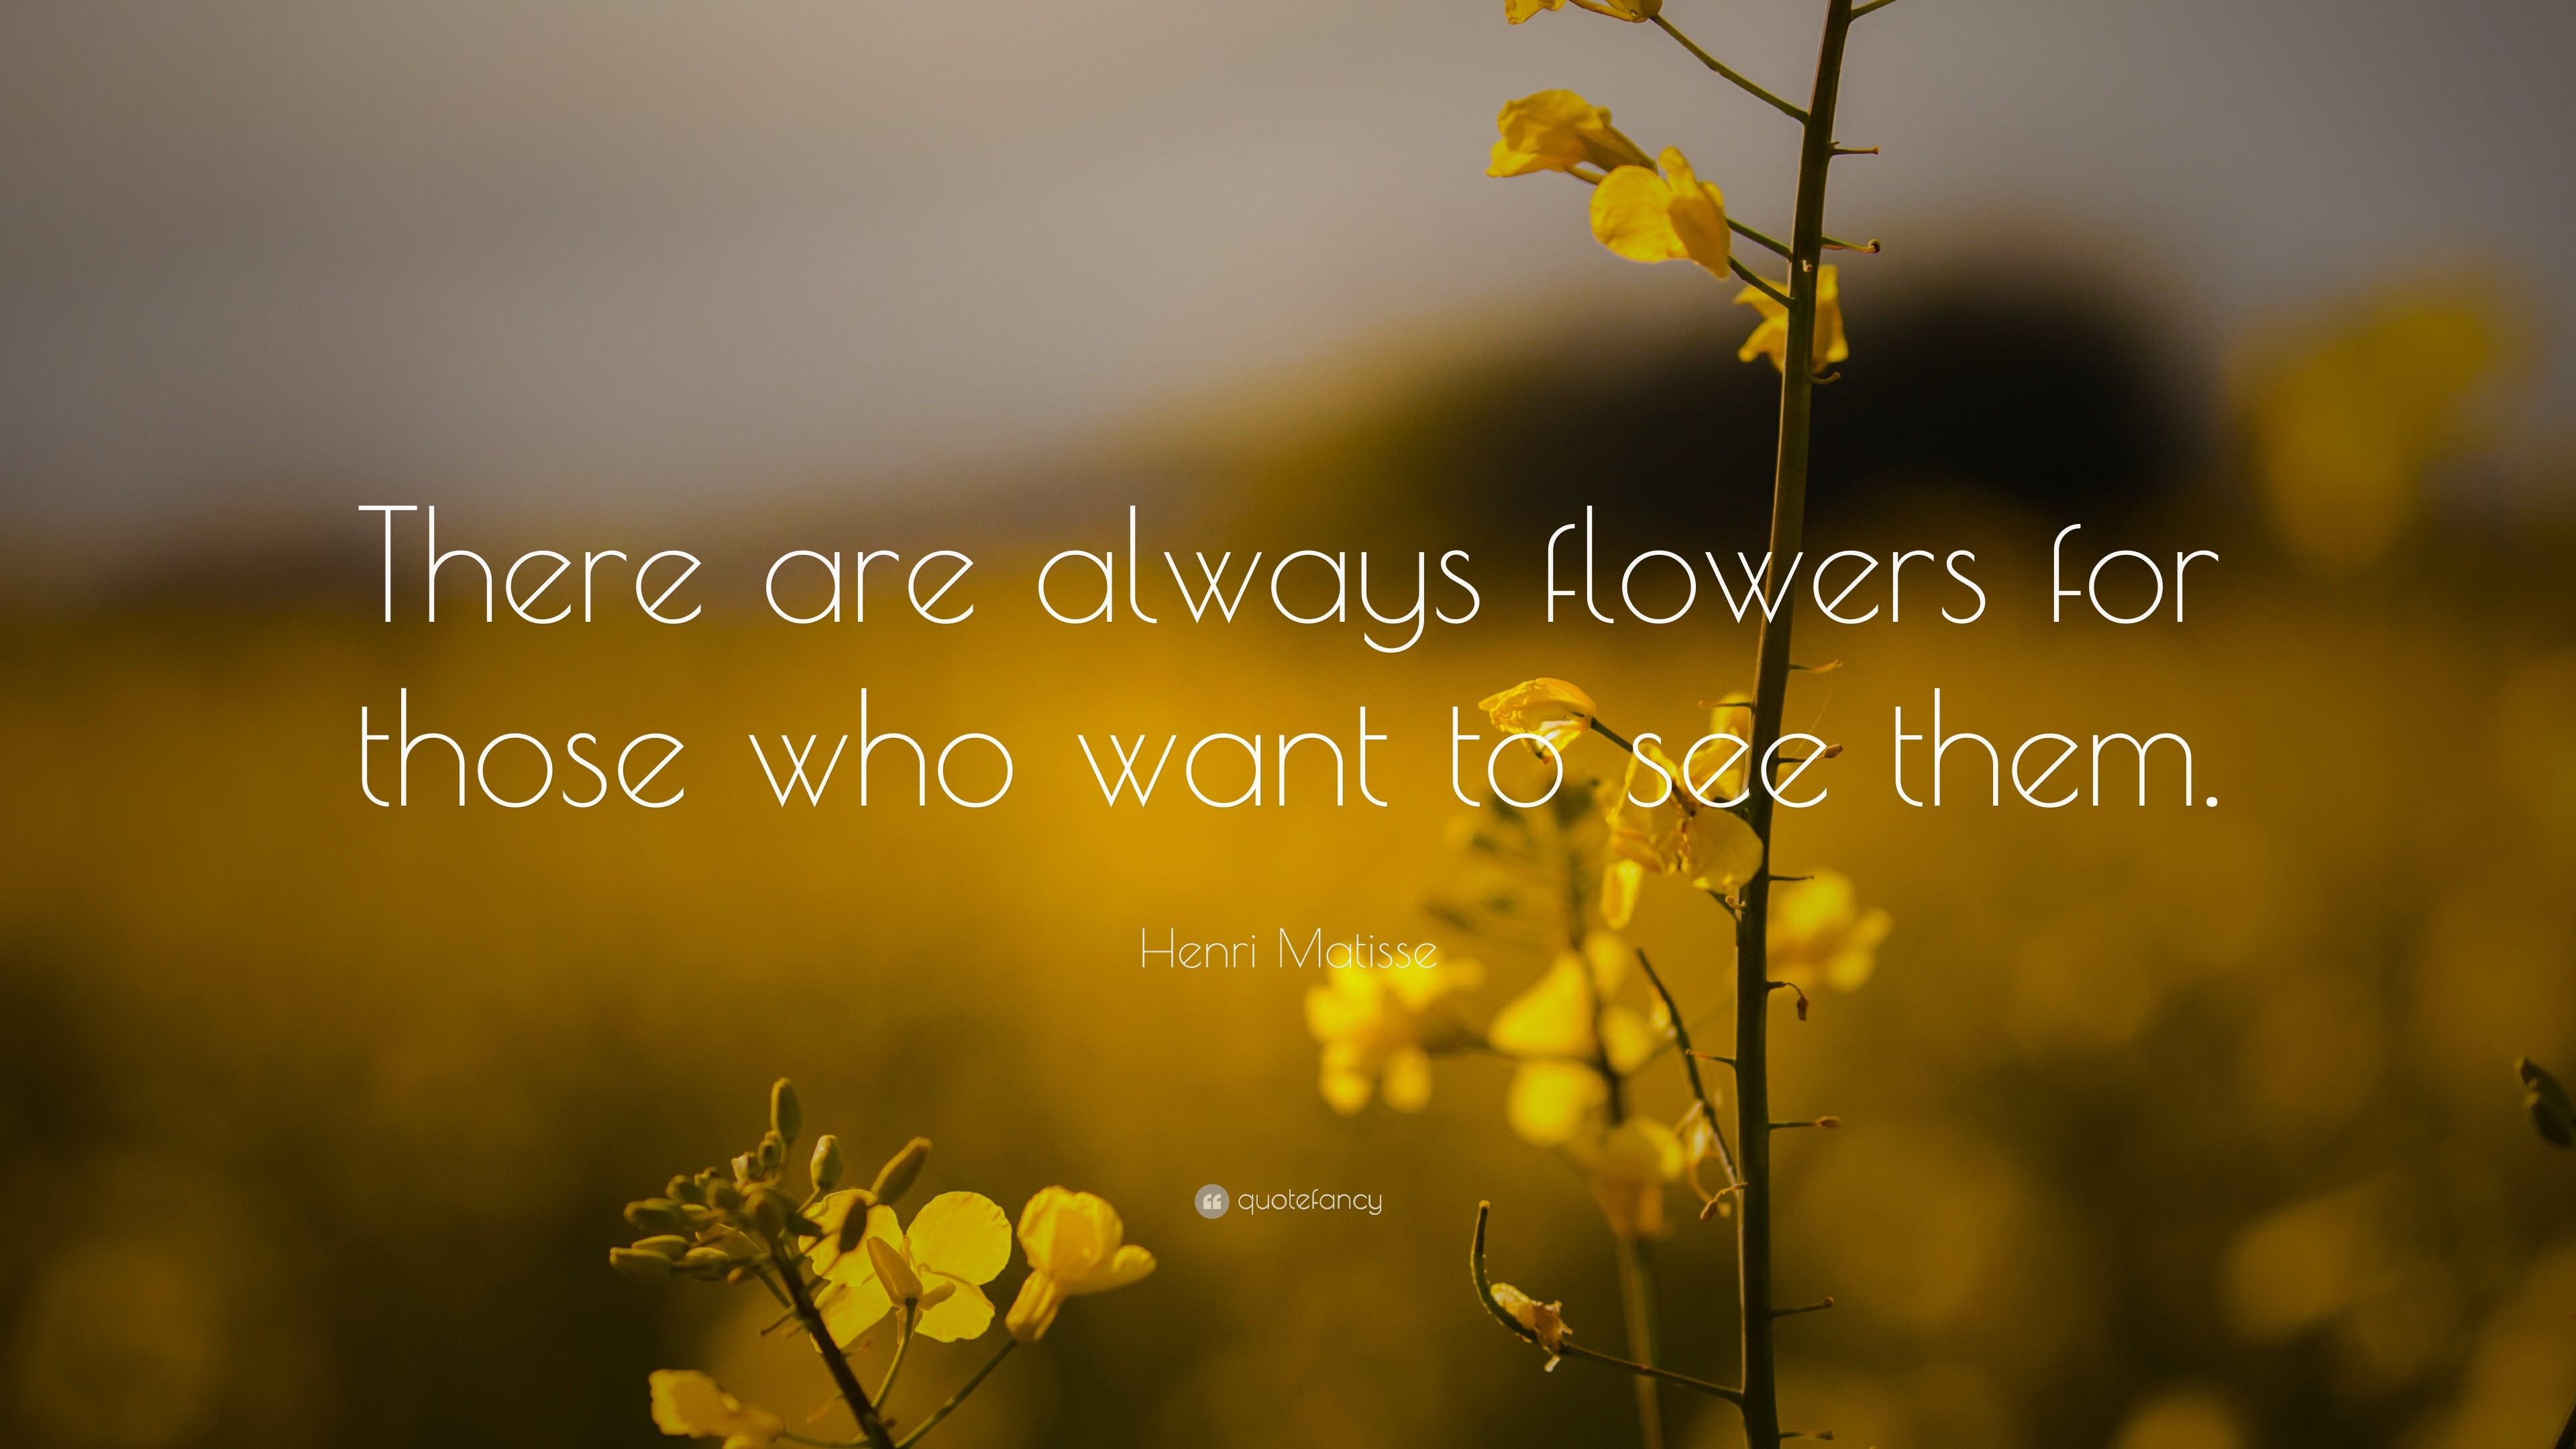 3840x2160 Positive Quotes: “There are always flowers for those who want to see them.